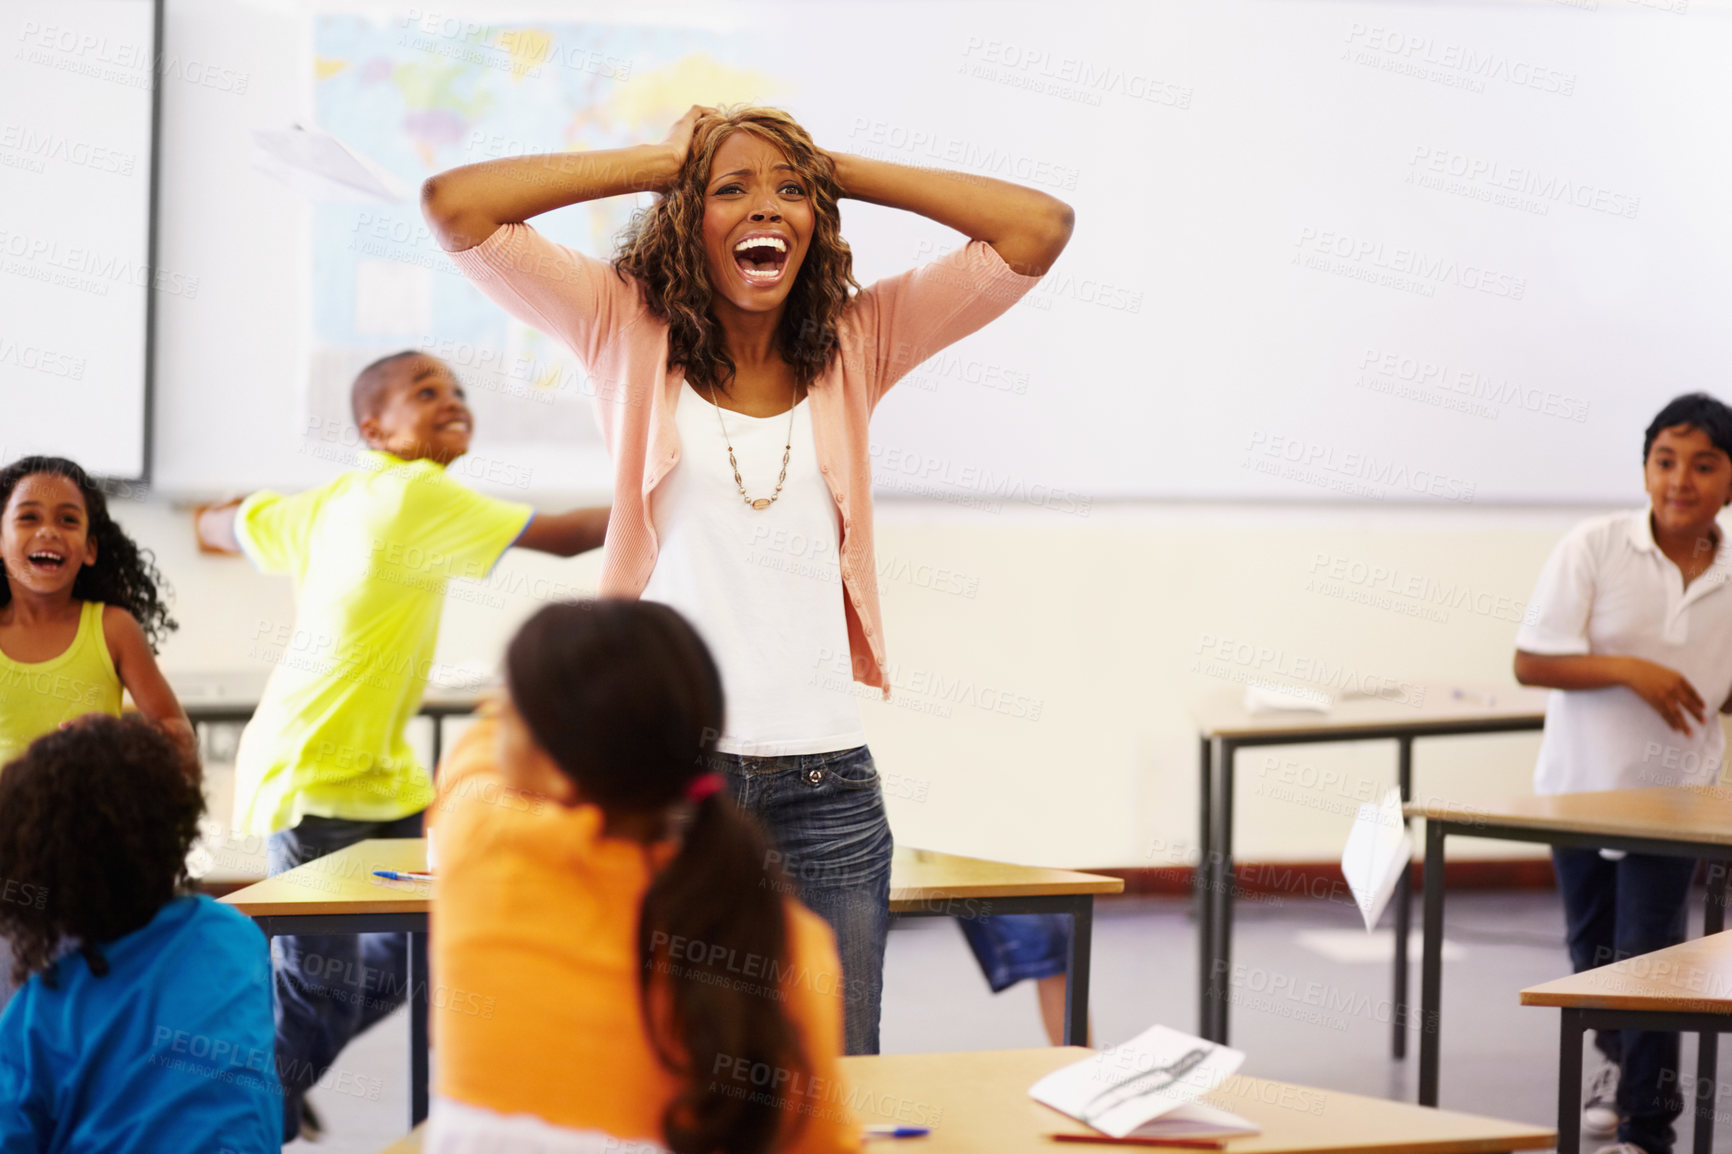 Buy stock photo Stress, teacher shouting and black woman in classroom with children running around. Education, headache and female person screaming with burnout, tired or fatigue with kids in busy class at school.